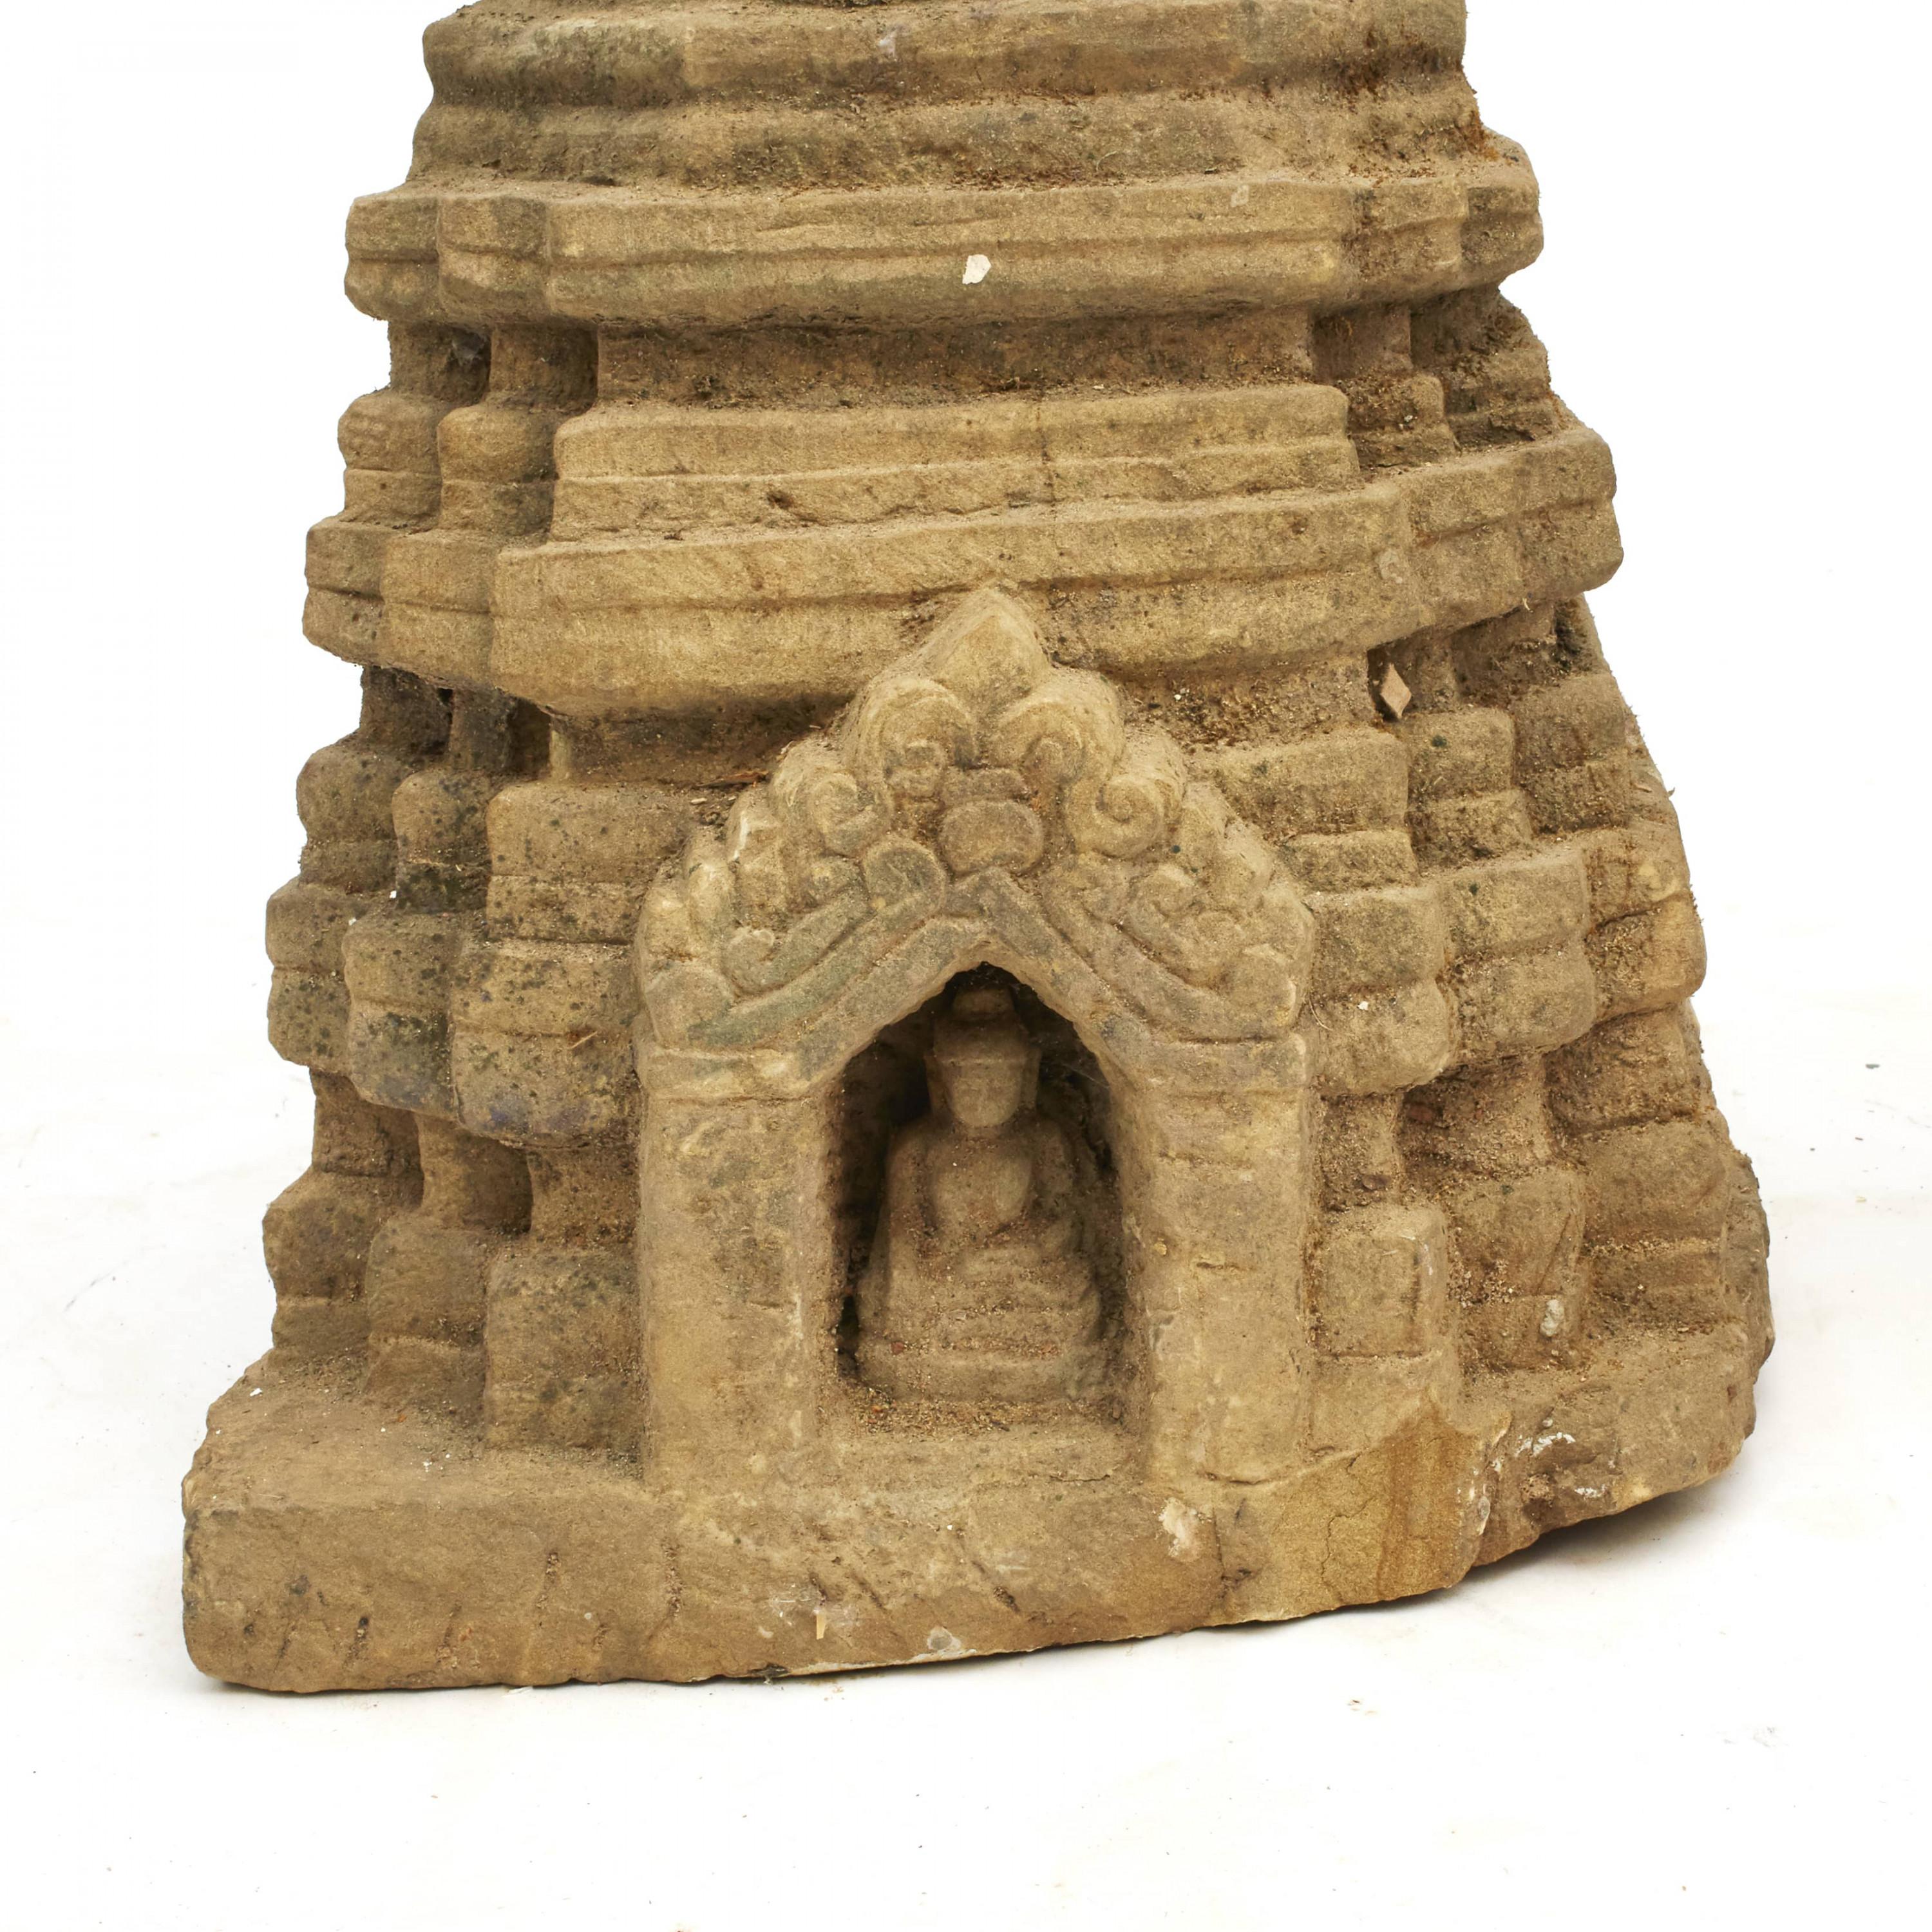 Other 400-600 Year Old Burmese Sandstone Stupa Pagoda Sculpture For Sale